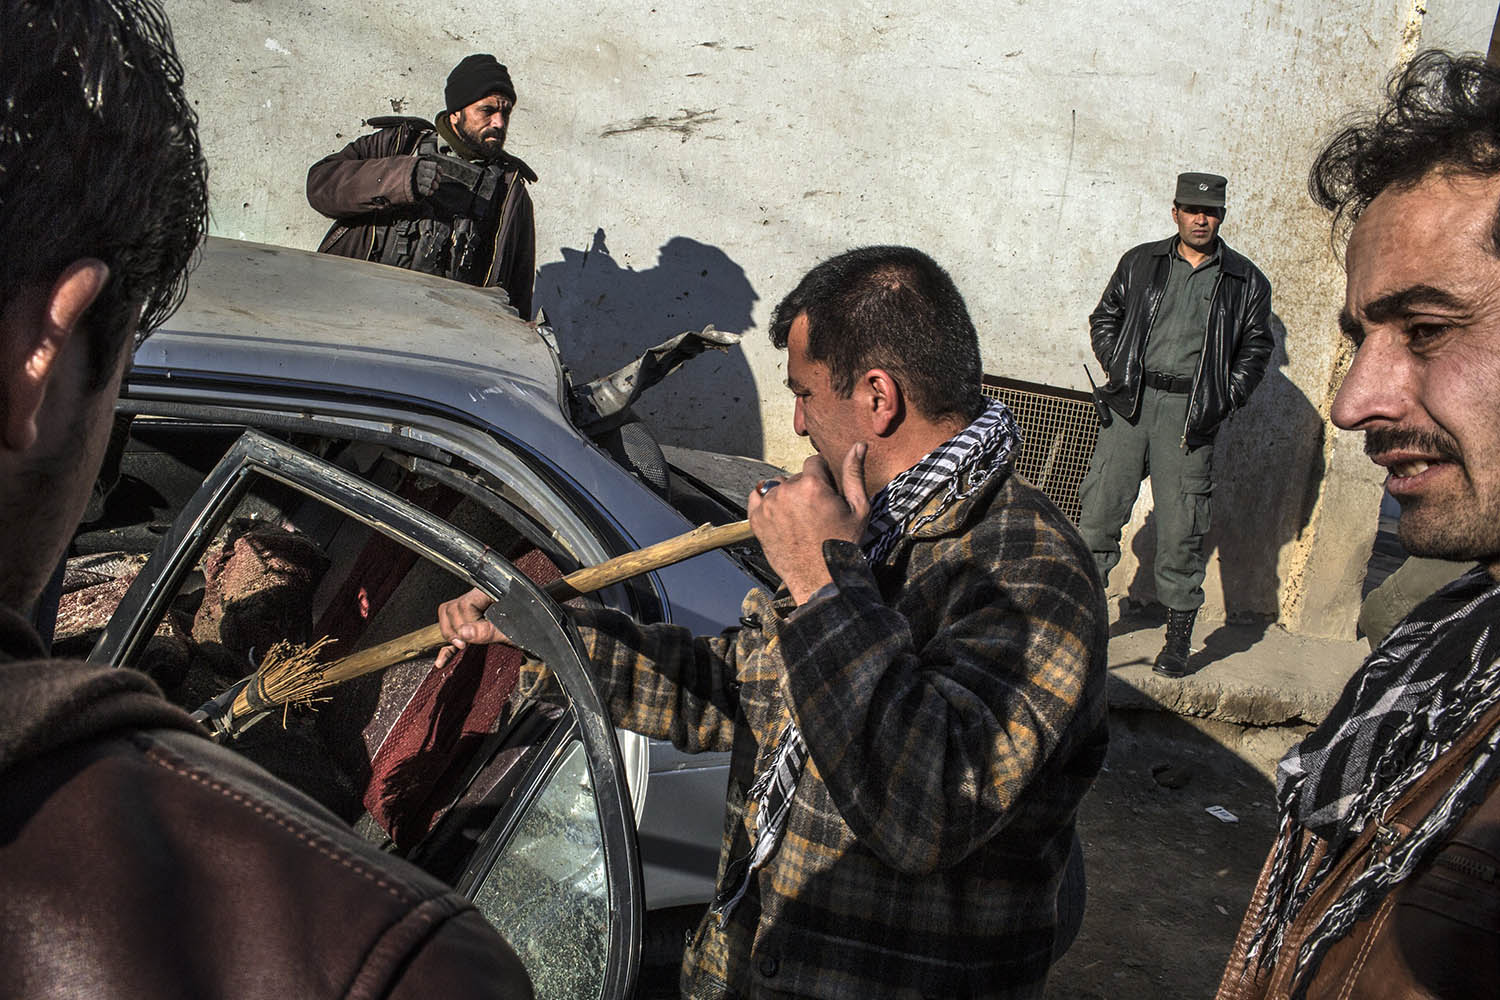 Jan. 18, 2013. A man sweeps out his damaged car near the entrance of a restaurant that was attacked in Kabul, Afghanistan.